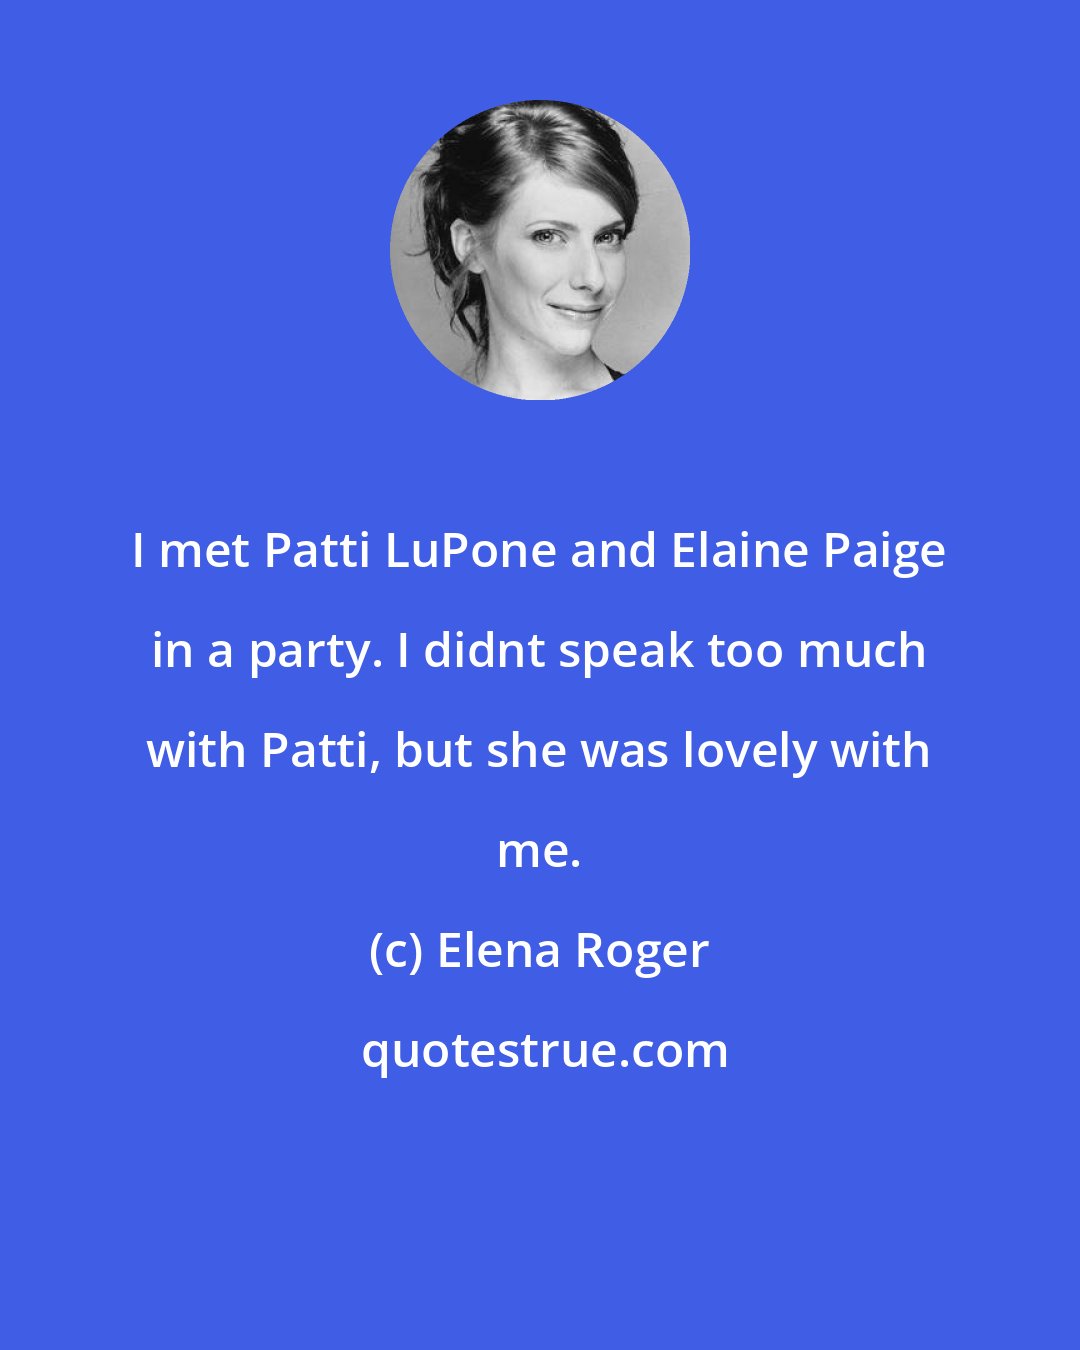 Elena Roger: I met Patti LuPone and Elaine Paige in a party. I didnt speak too much with Patti, but she was lovely with me.